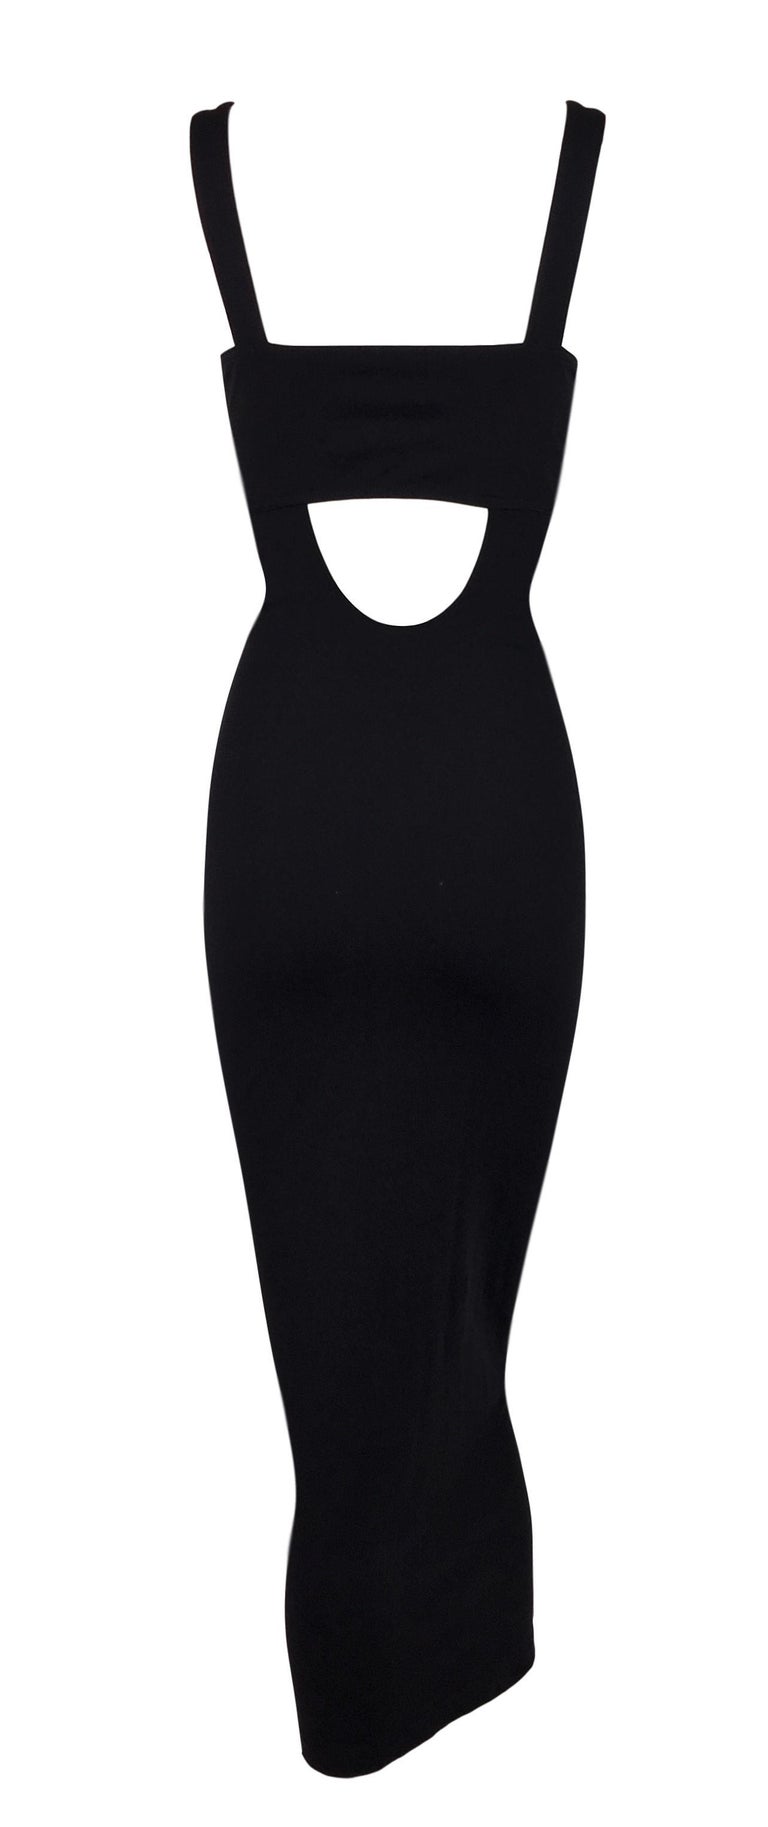 Vintage S/S 1998 Chanel Black Cut-Out Bodycon Pin-Up Wiggle Dress